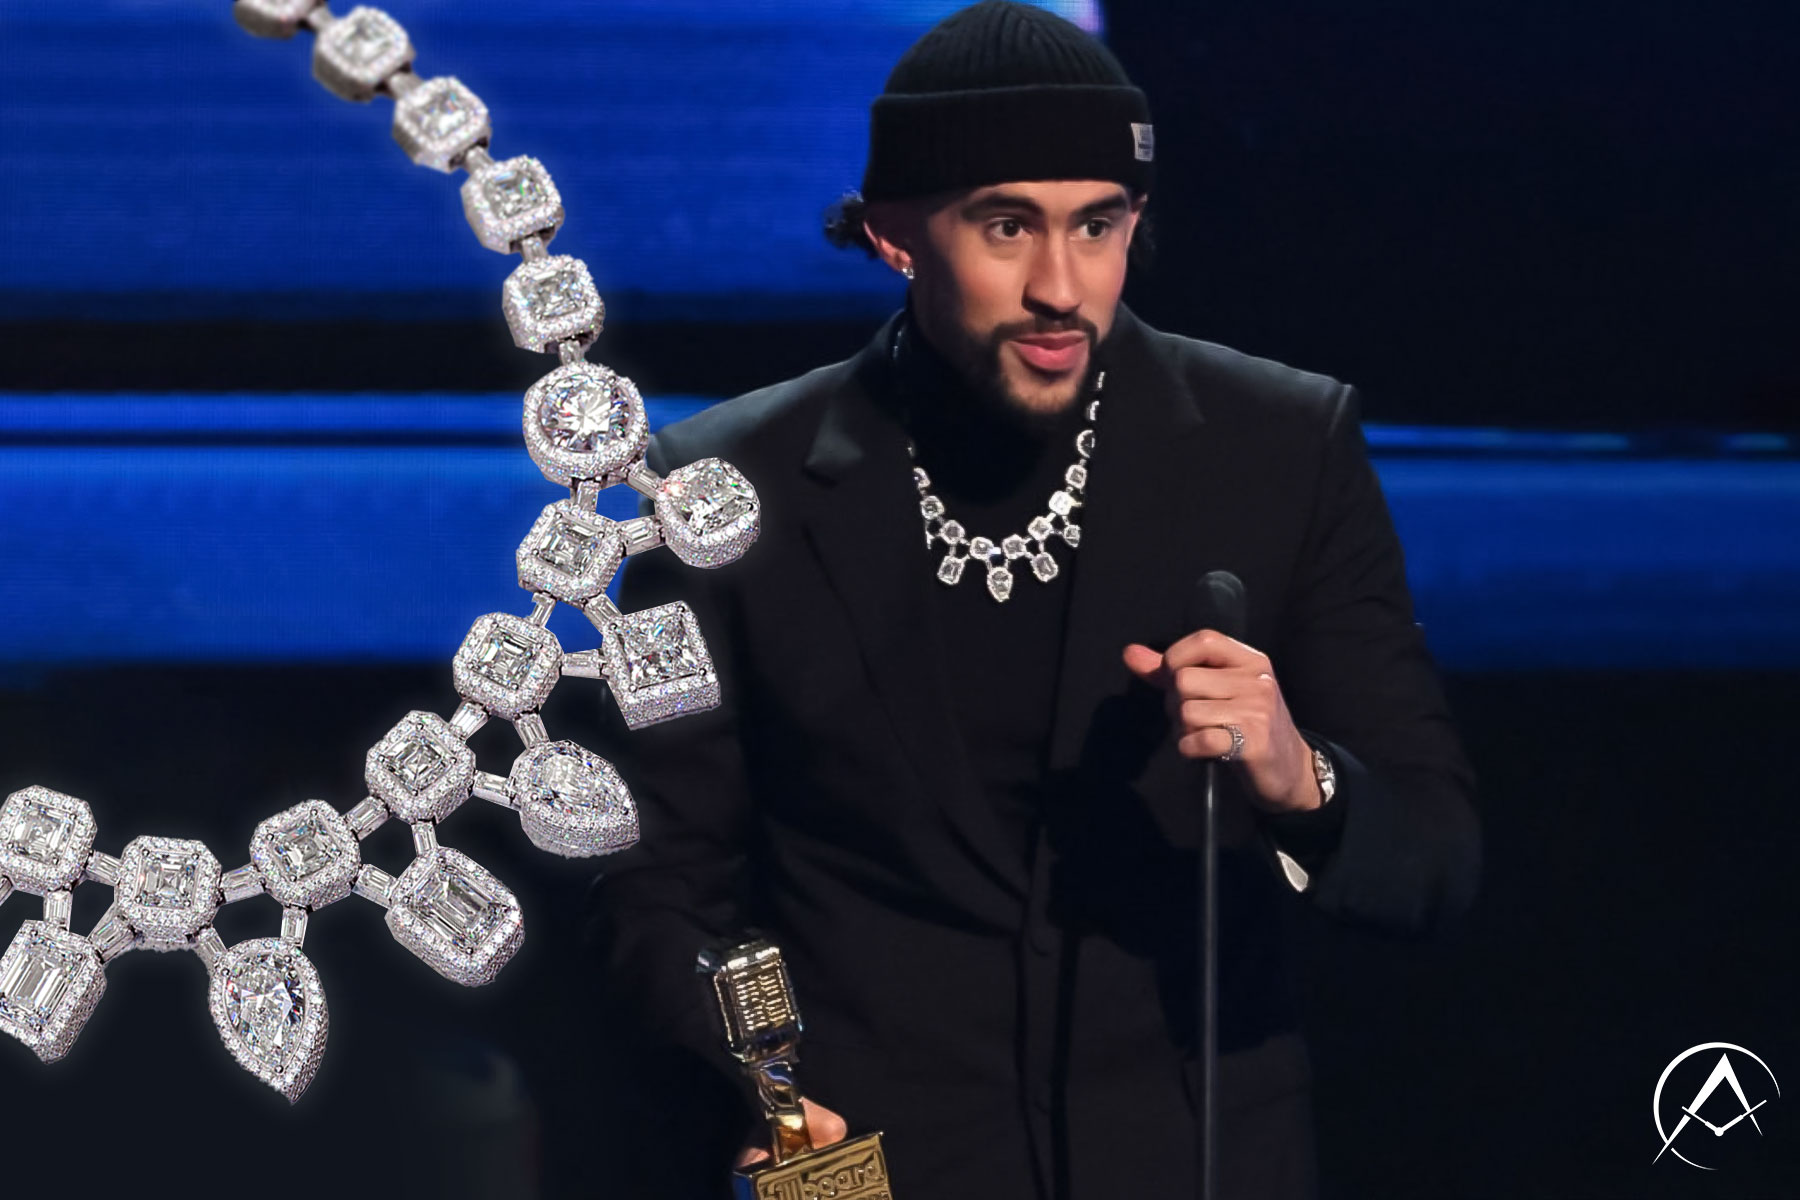 Man Stands on Stage Holding Latin Music Award While Wearing Black Suit with Black Turtleneck and Beanie, and Diamond-Pave Chain.